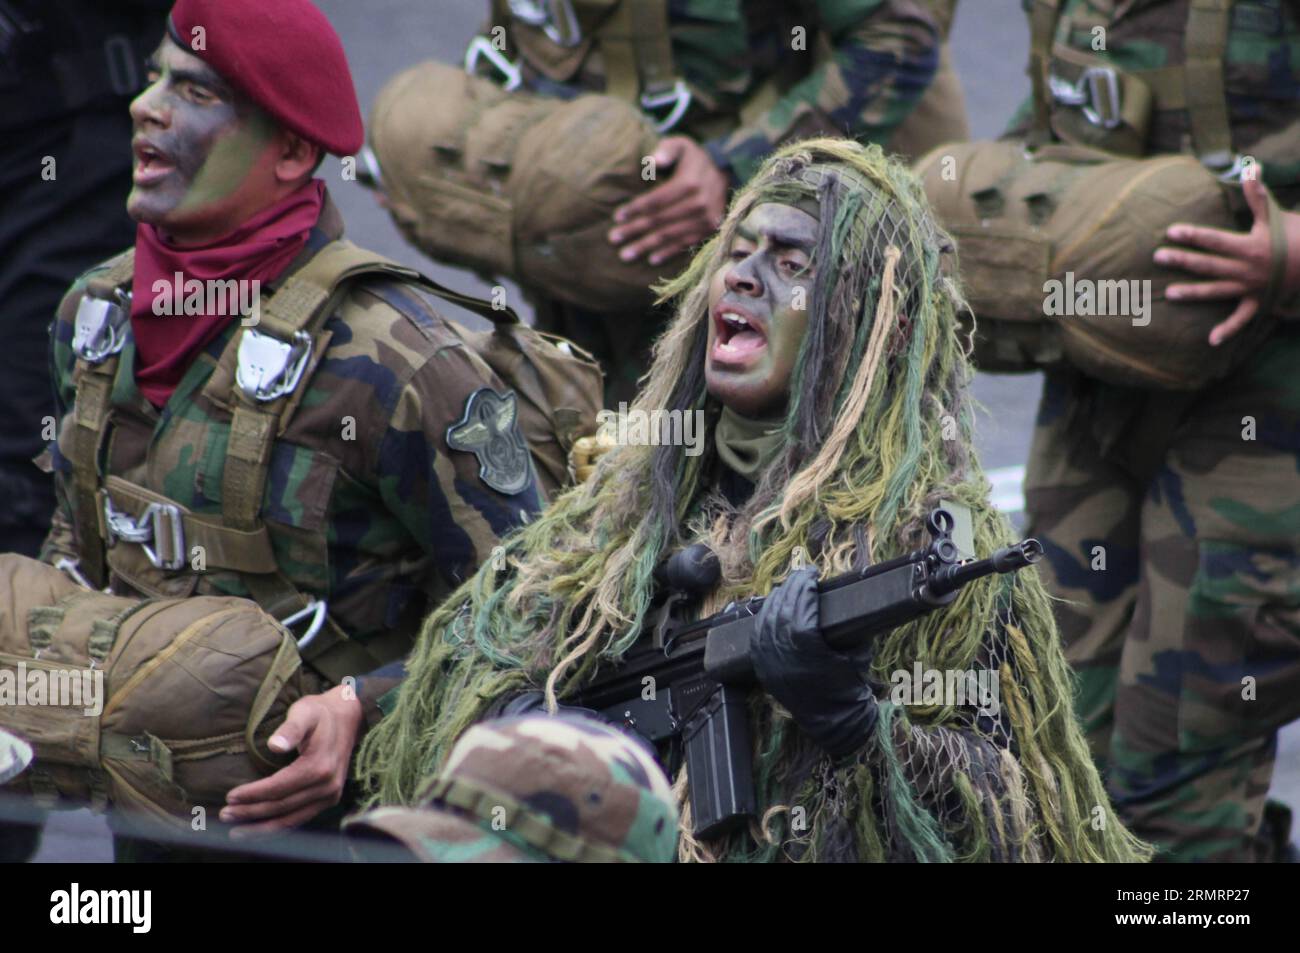 LIMA, July 29, 2014 / Soldiers of Peru s armed forces participate in the military parade as part of the celebration activities of the Independence Day of Peru on the Brazil avenue in Lima city, capital of Peru, on July 29, 2014. (Xinhua/Luis Camacho)(zhf) PERU-LIMA-MILITARY-INDEPENDENCE DAY PUBLICATIONxNOTxINxCHN   Lima July 29 2014 Soldiers of Peru S Armed Forces participate in The Military Parade As Part of The Celebration Activities of The Independence Day of Peru ON The Brazil Avenue in Lima City Capital of Peru ON July 29 2014 XINHUA Luis Camacho  Peru Lima Military Independence Day PUBLI Stock Photo